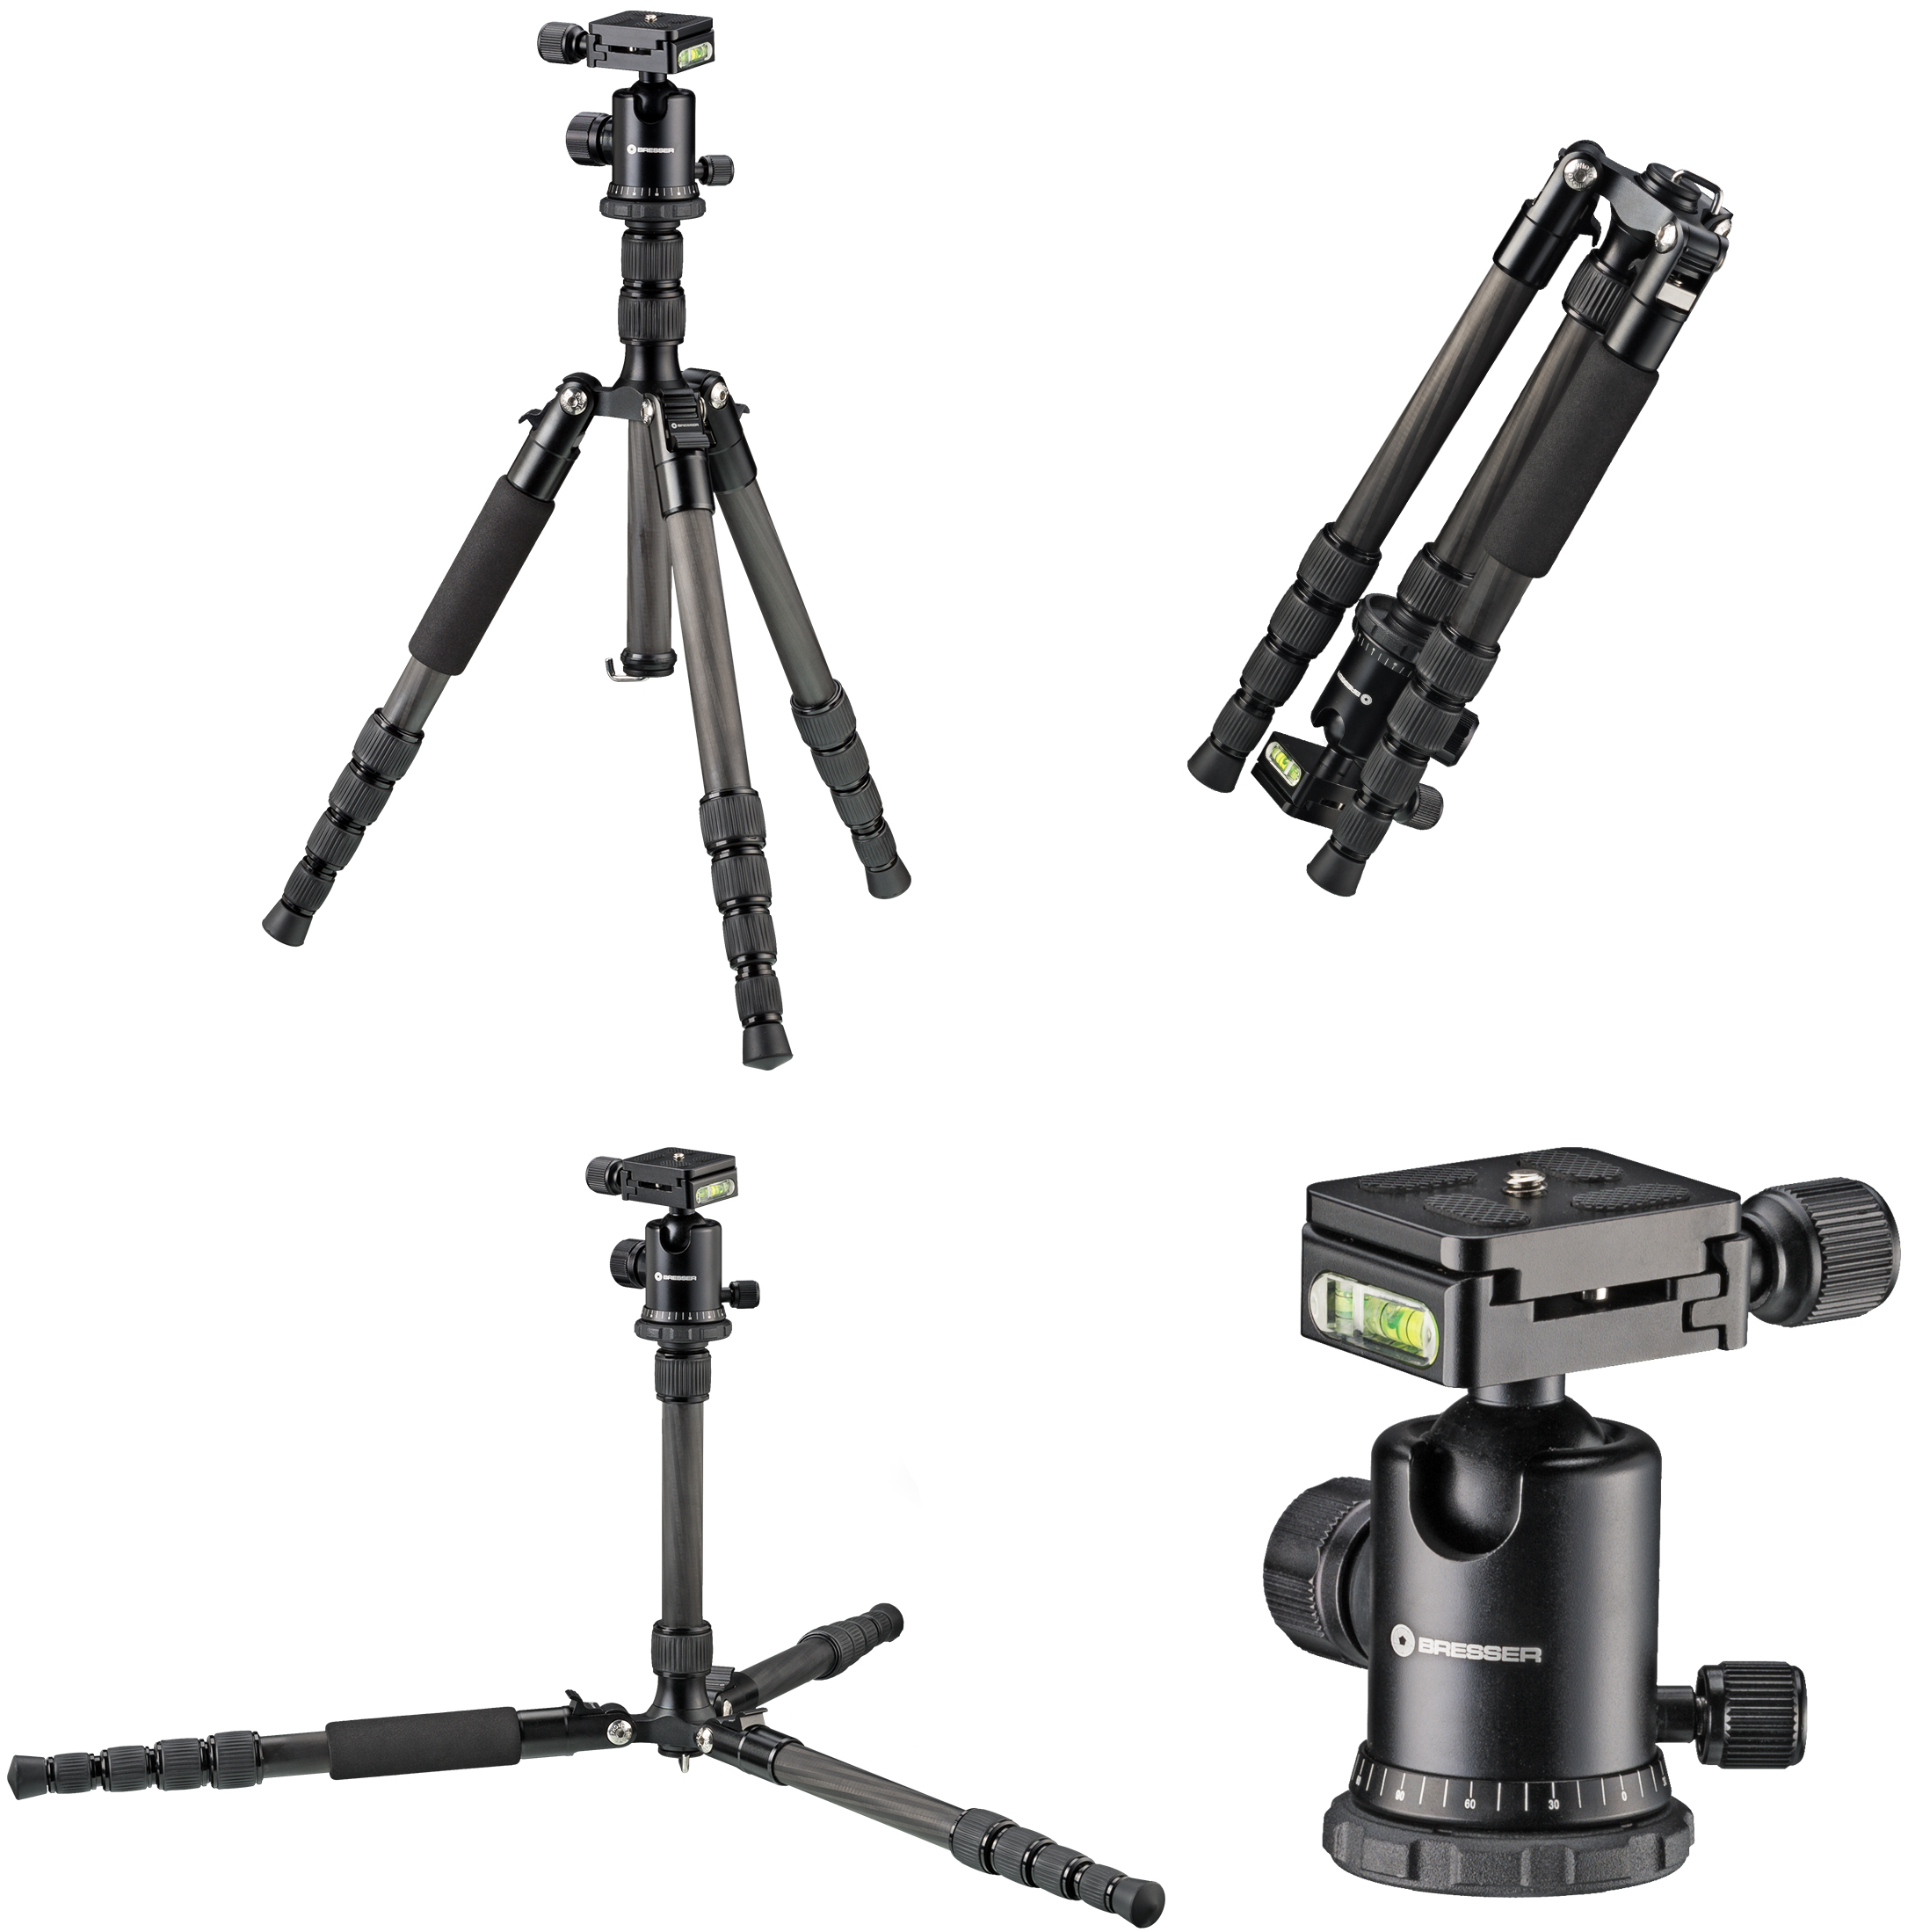 BRESSER BR-2205-N1 Carbon Photo Tripod up to 8 kg also usable as Ground Level Tripod